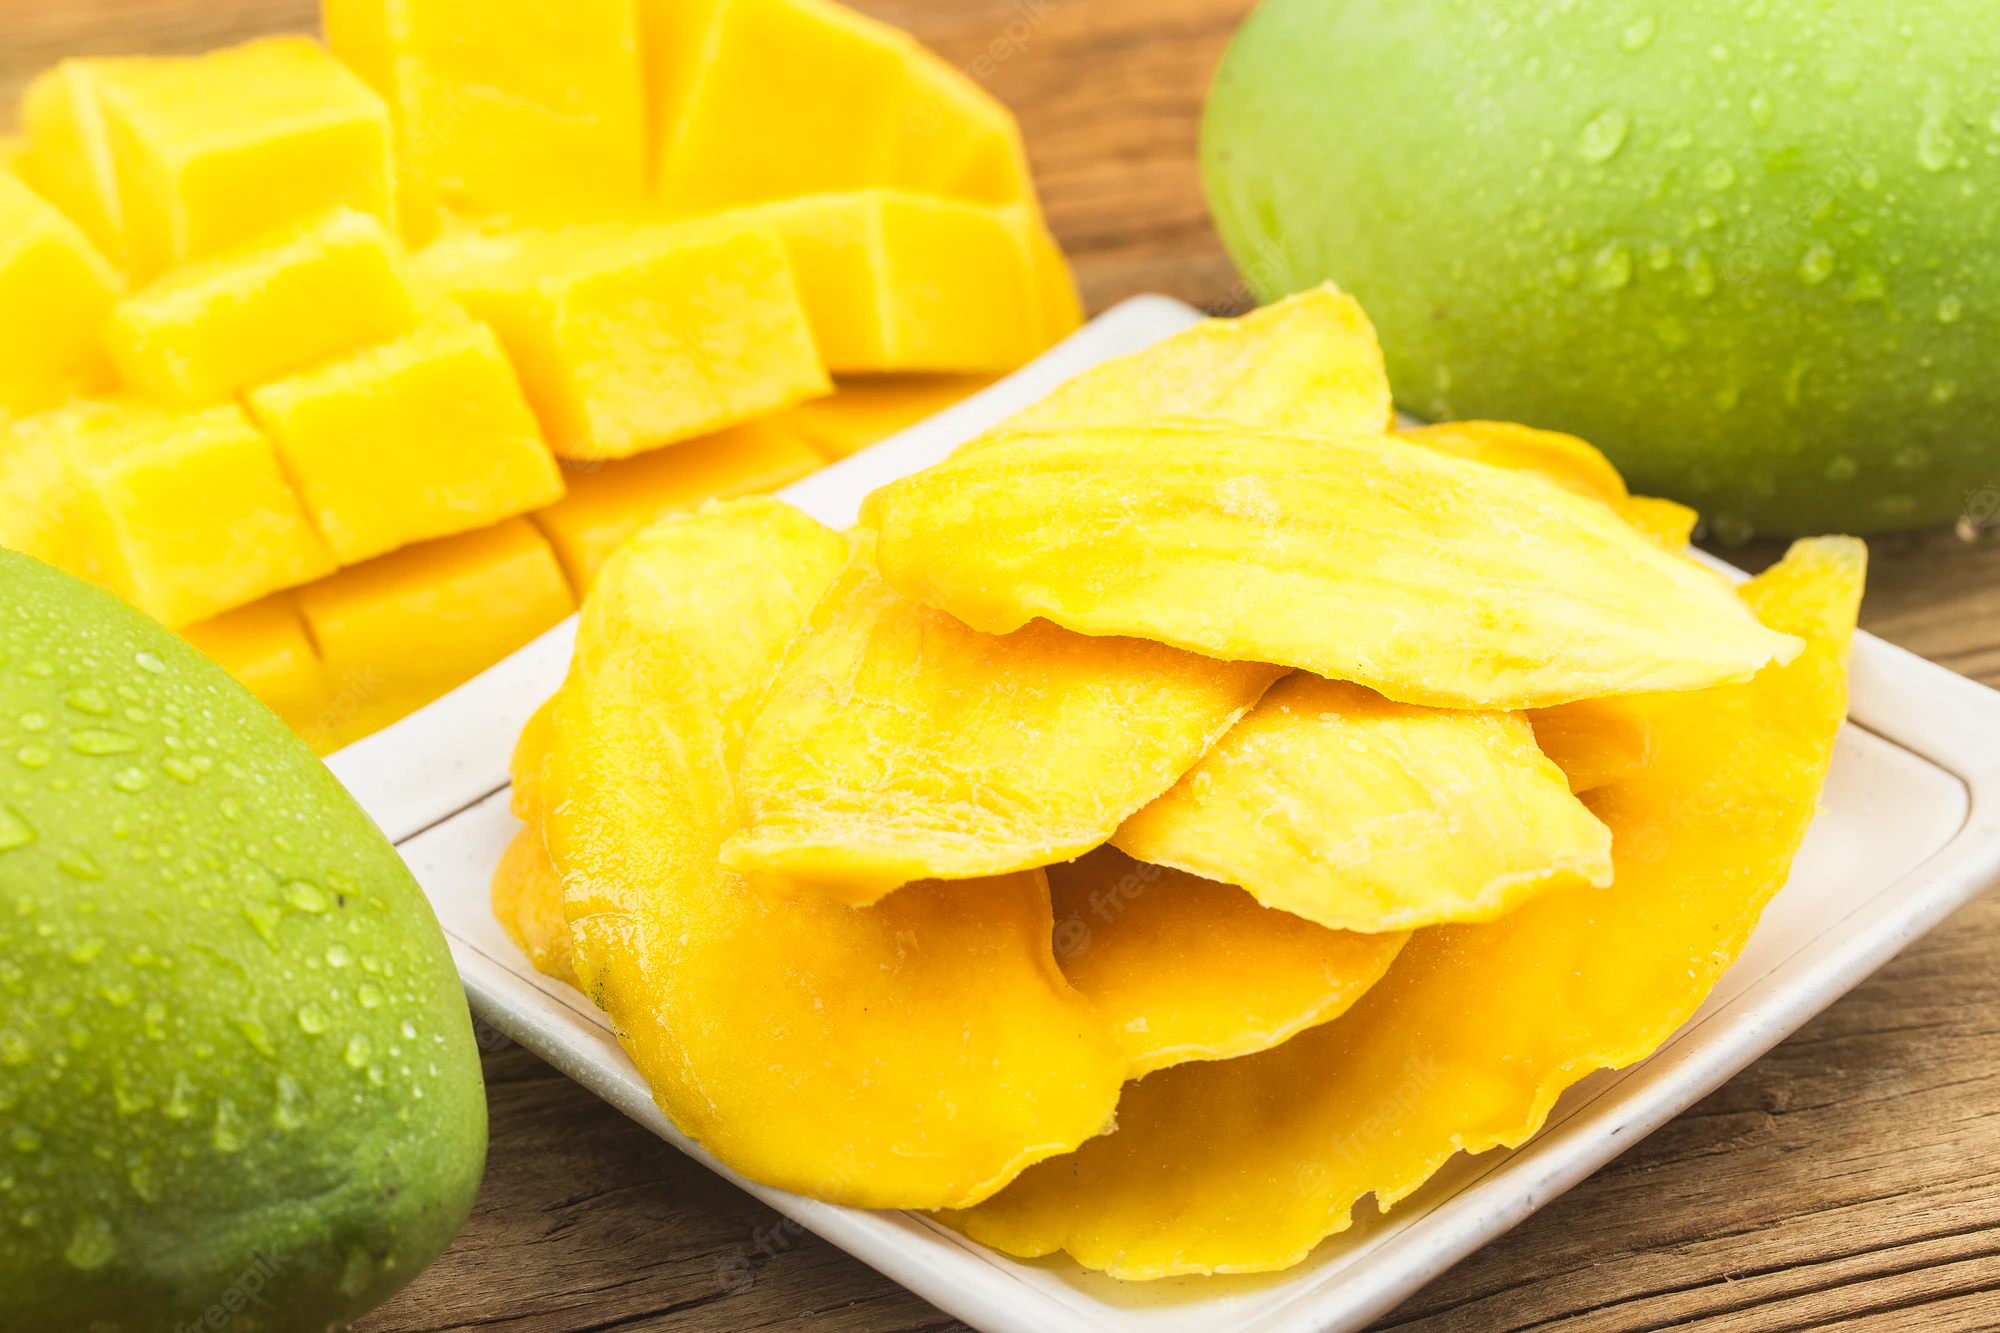 What are the health benefits of dried mango?